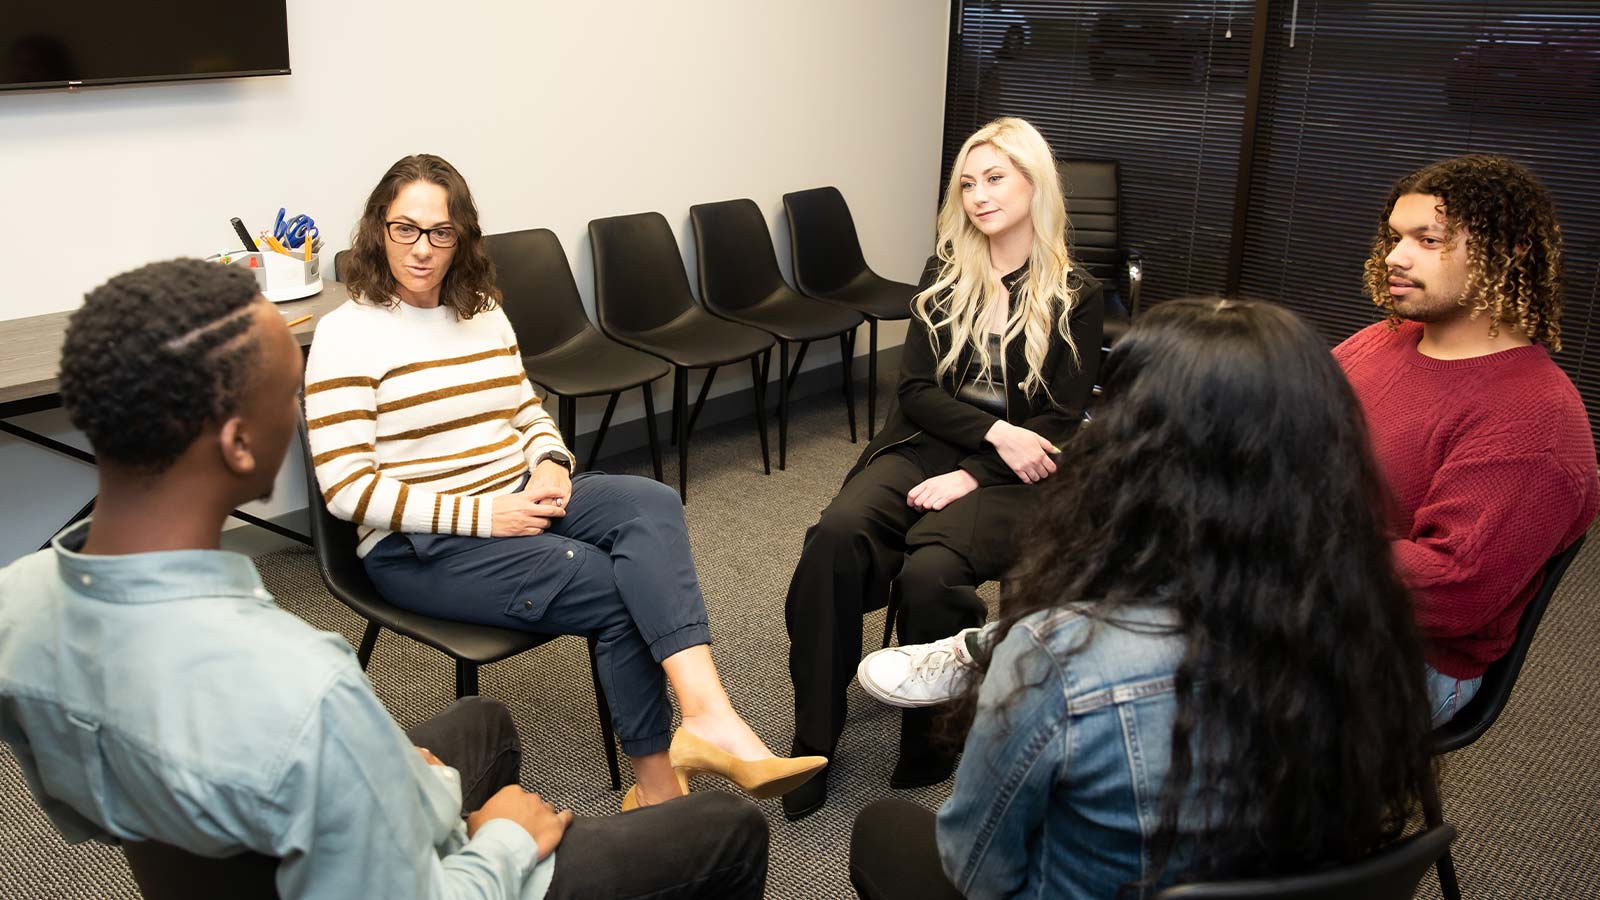 A therapy session with a professional and participants engaging in conversation in a comfortable room.